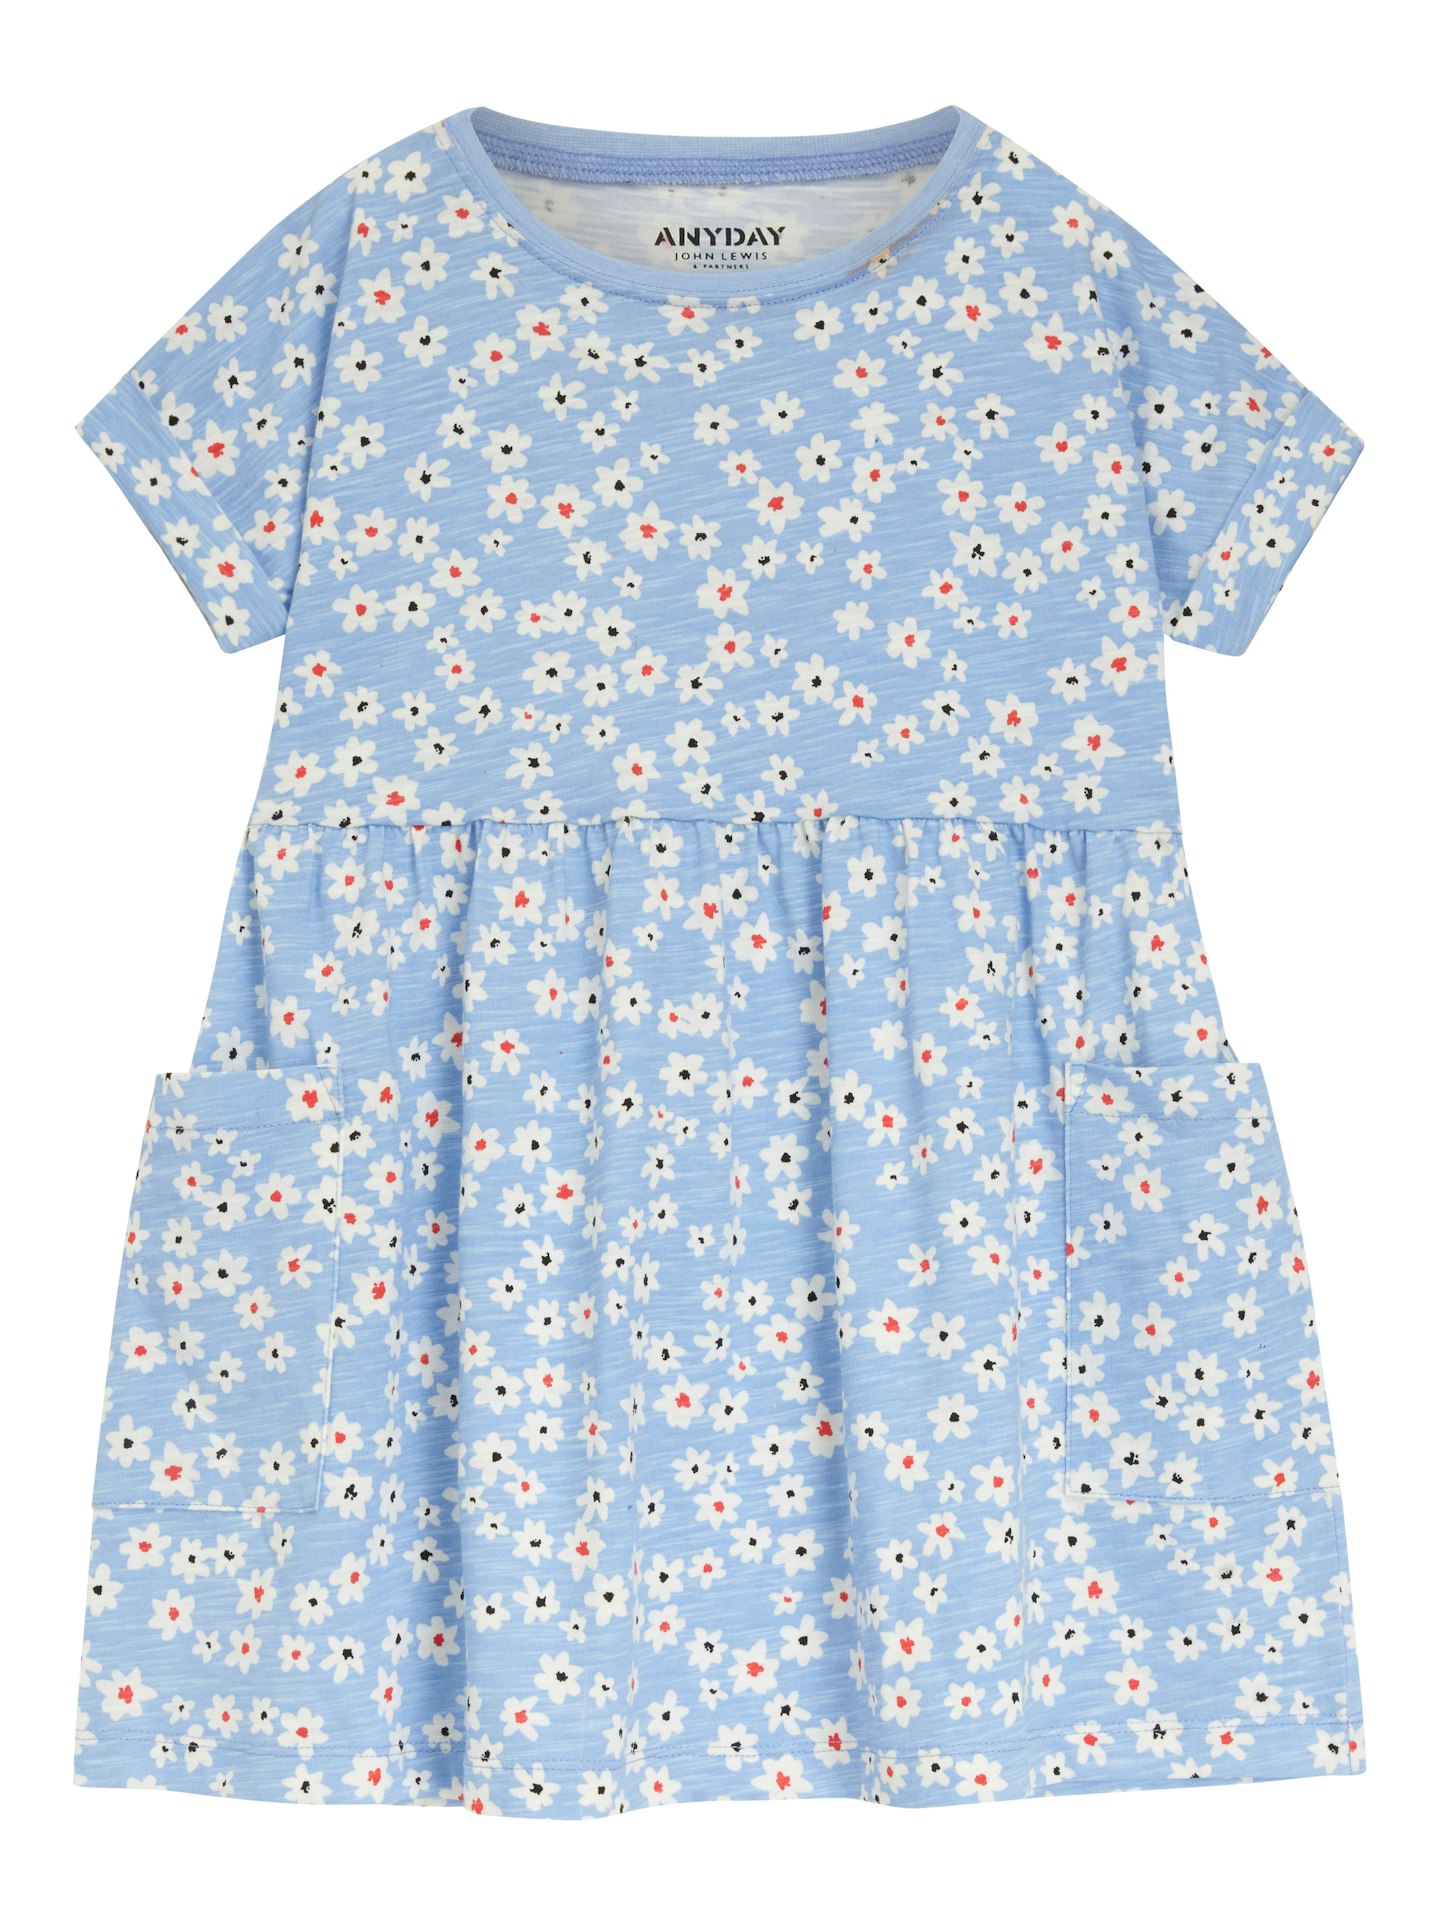 Anyday, Ditsy Floral Jersey Swing Dress, £20